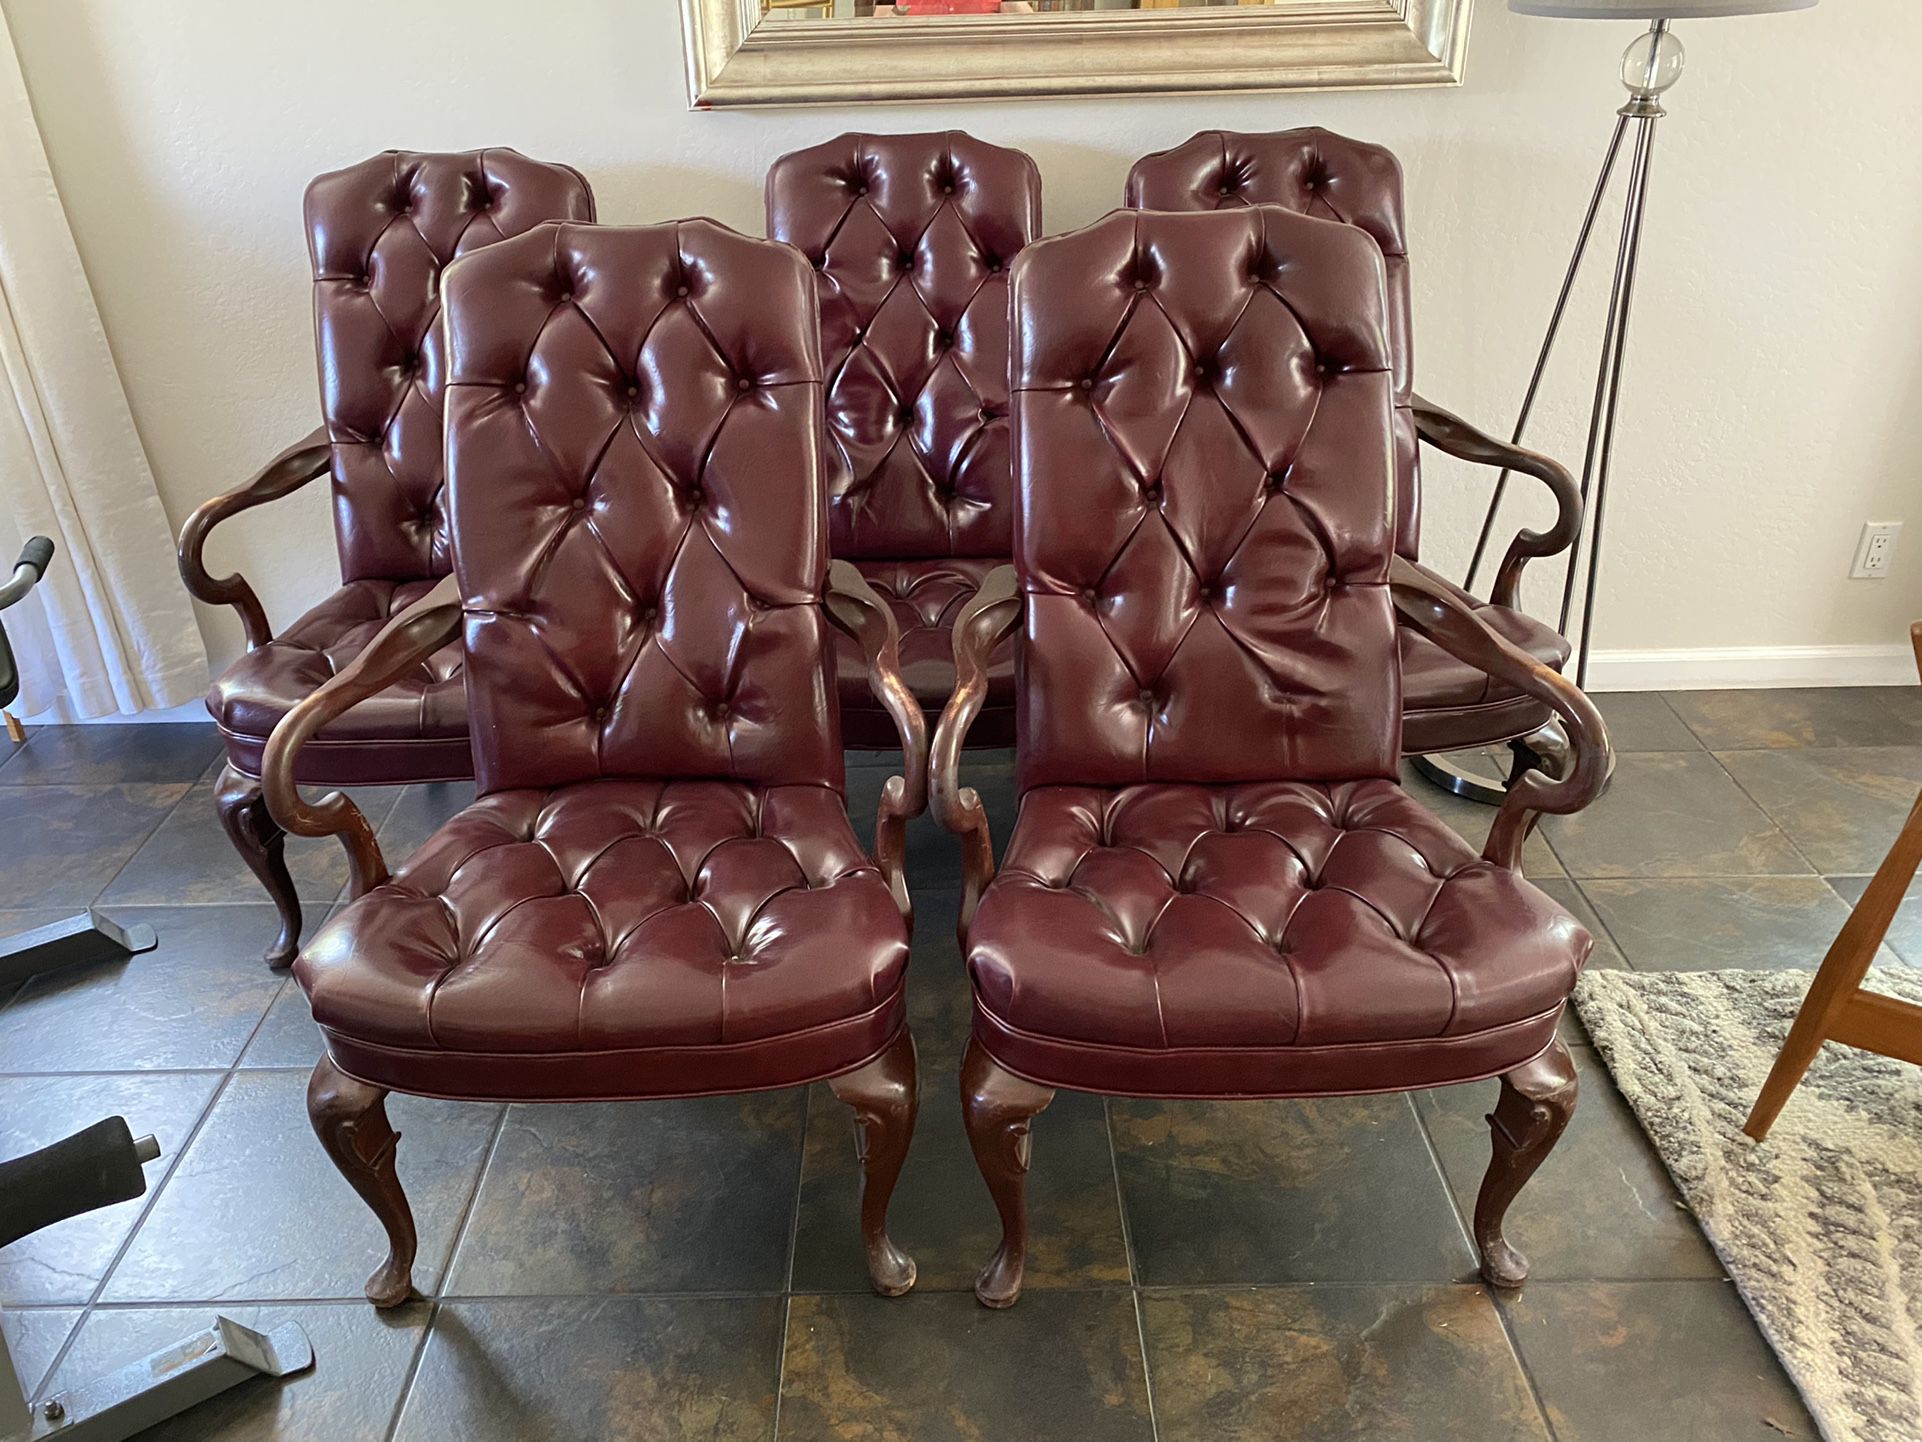 Vintage Burgundy Leather Chairs